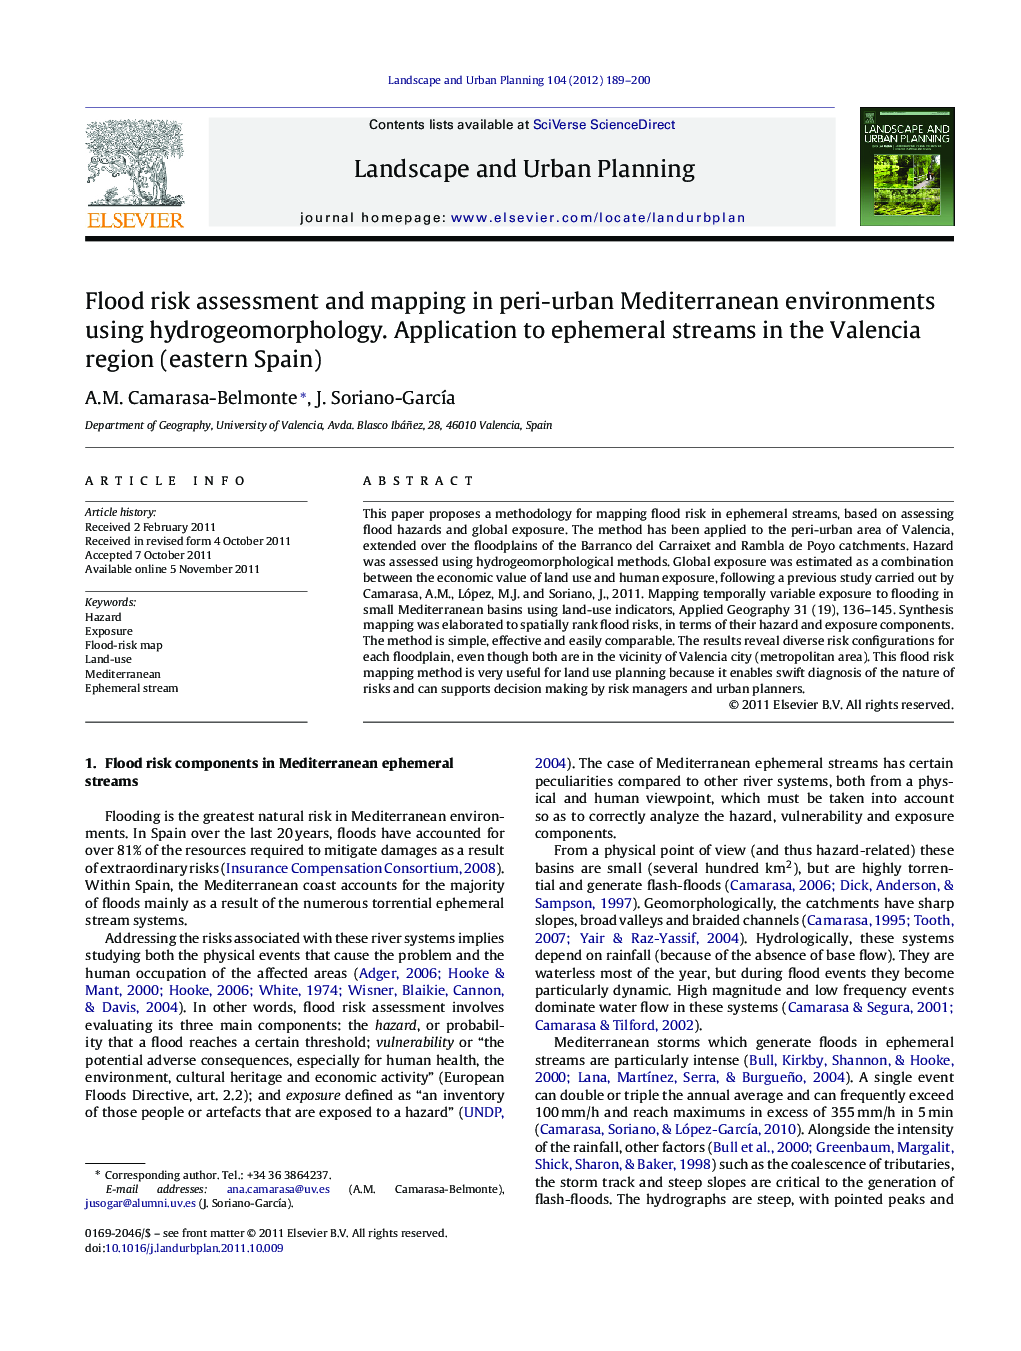 Flood risk assessment and mapping in peri-urban Mediterranean environments using hydrogeomorphology. Application to ephemeral streams in the Valencia region (eastern Spain)